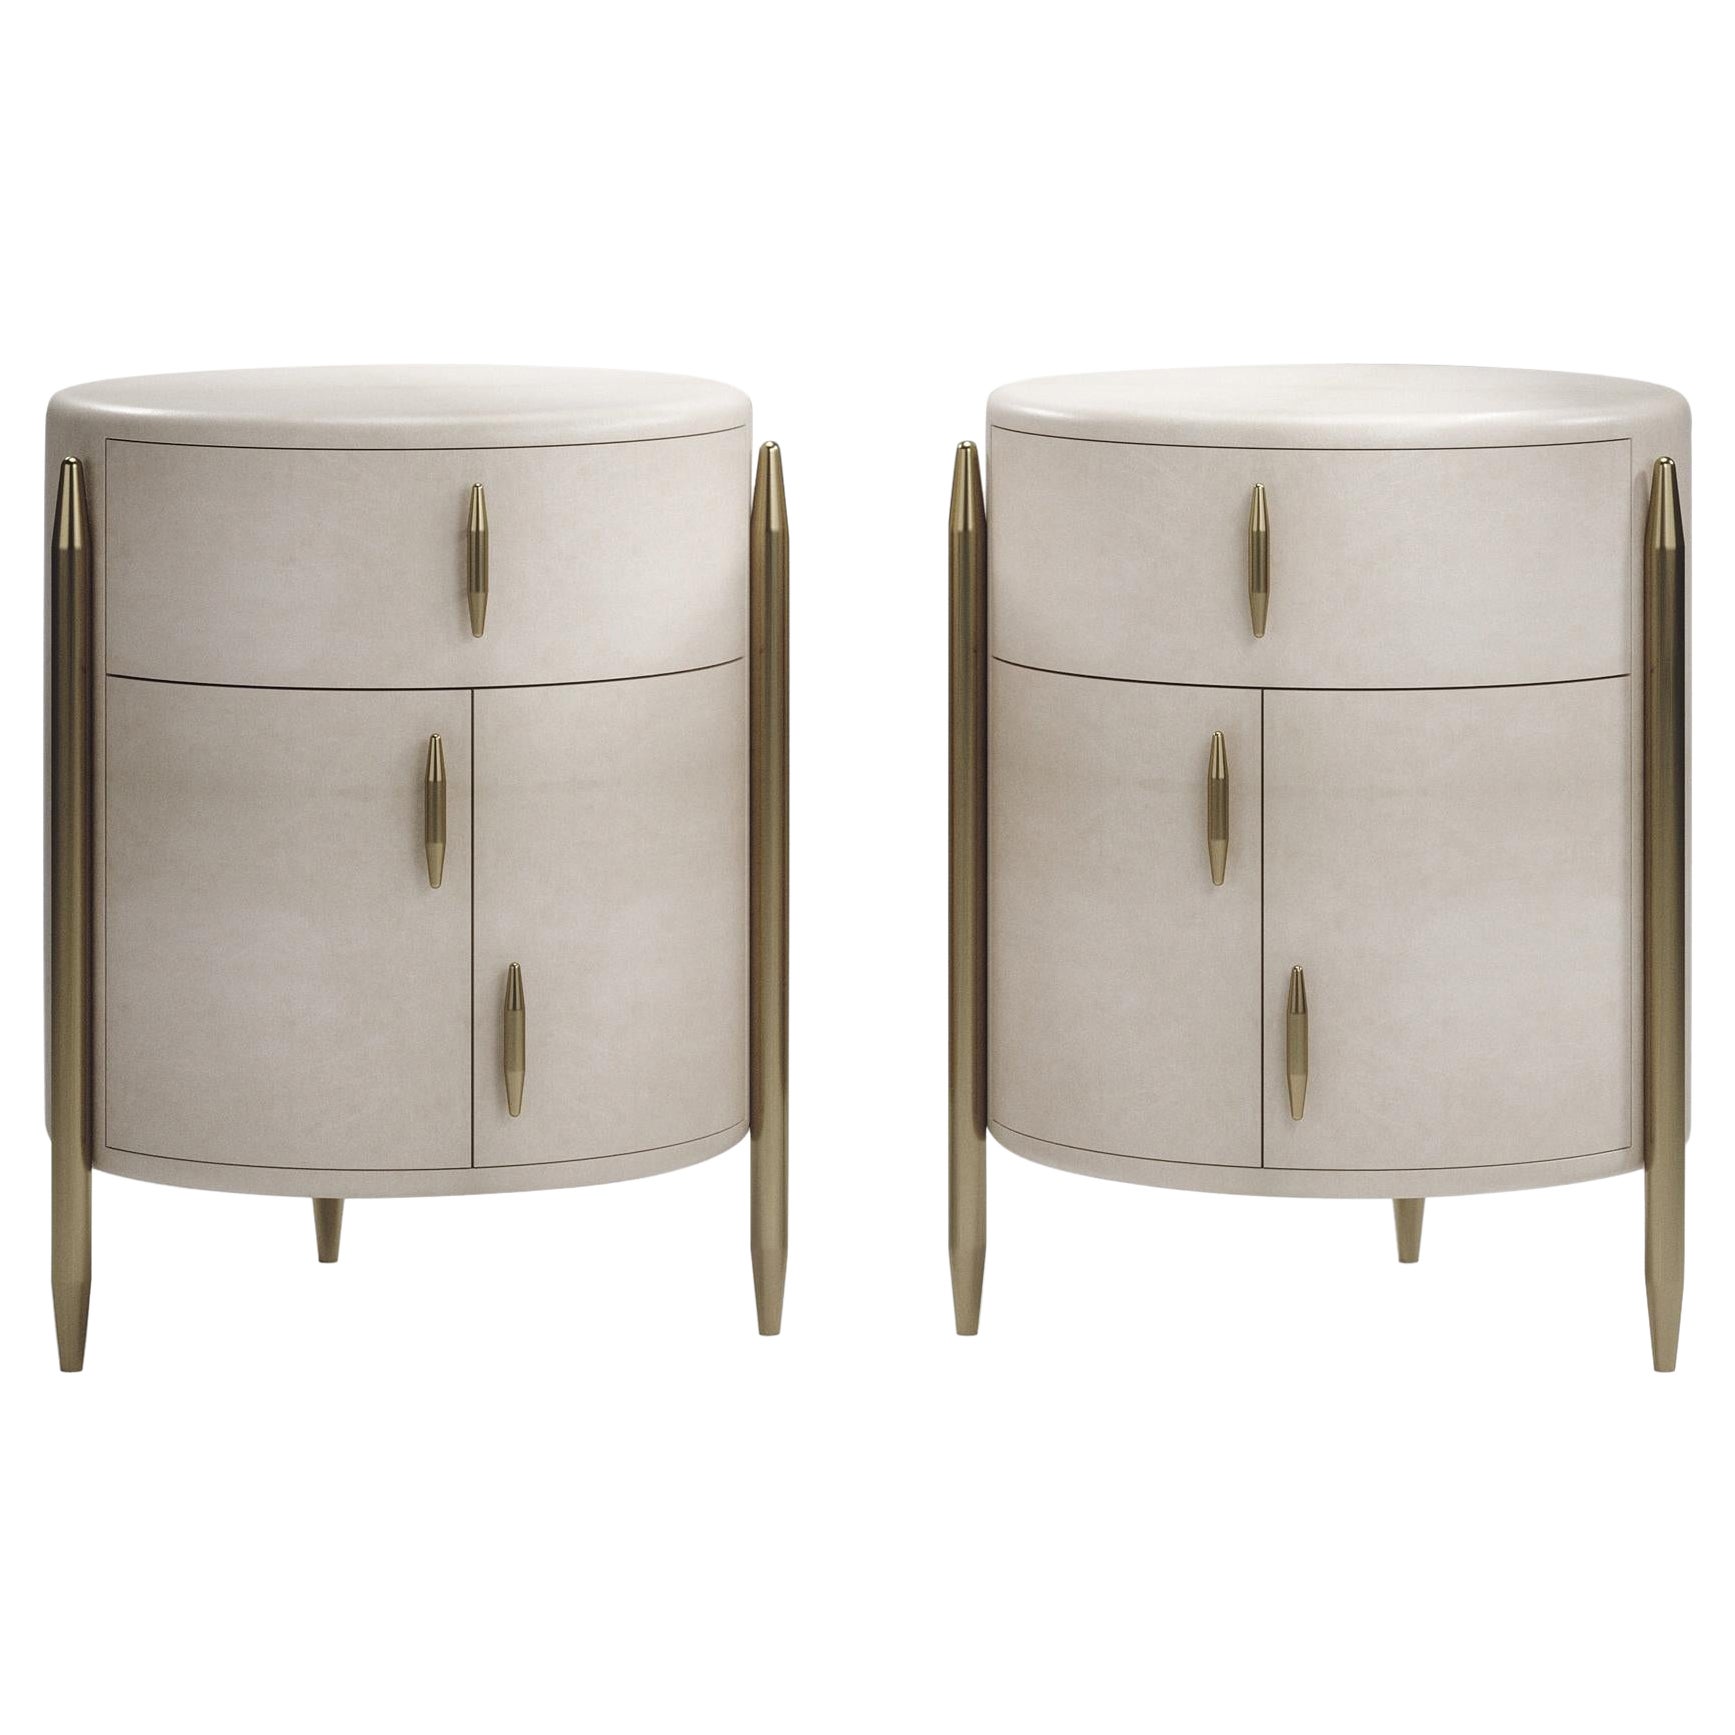 Pair of Parchment Night Stands with Brass Accents by Kifu Paris